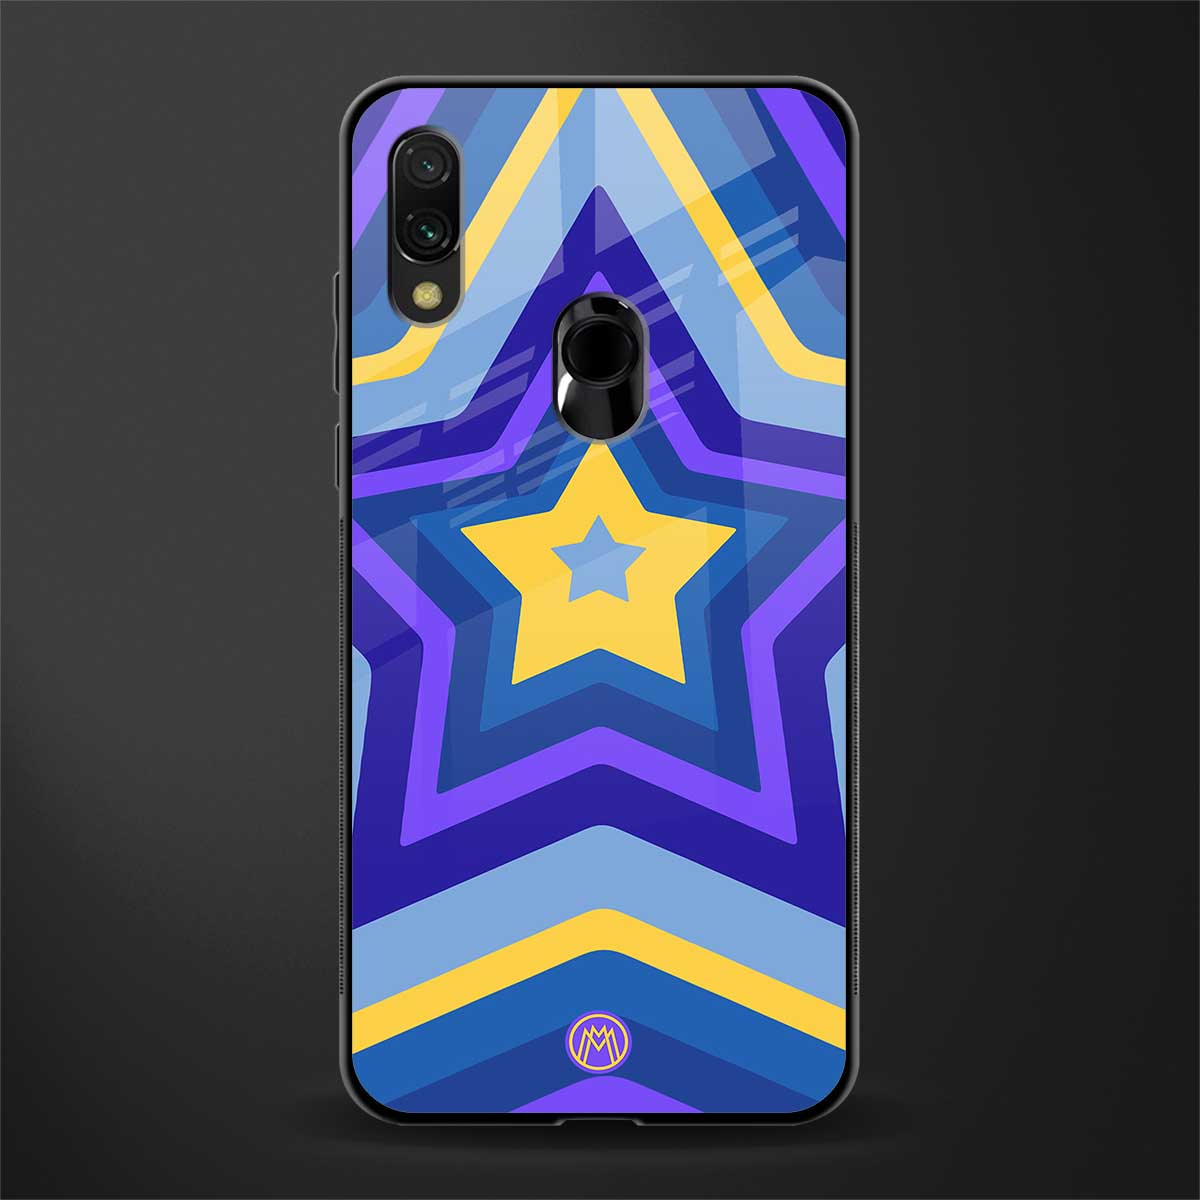 y2k yellow blue stars glass case for redmi note 7 pro image